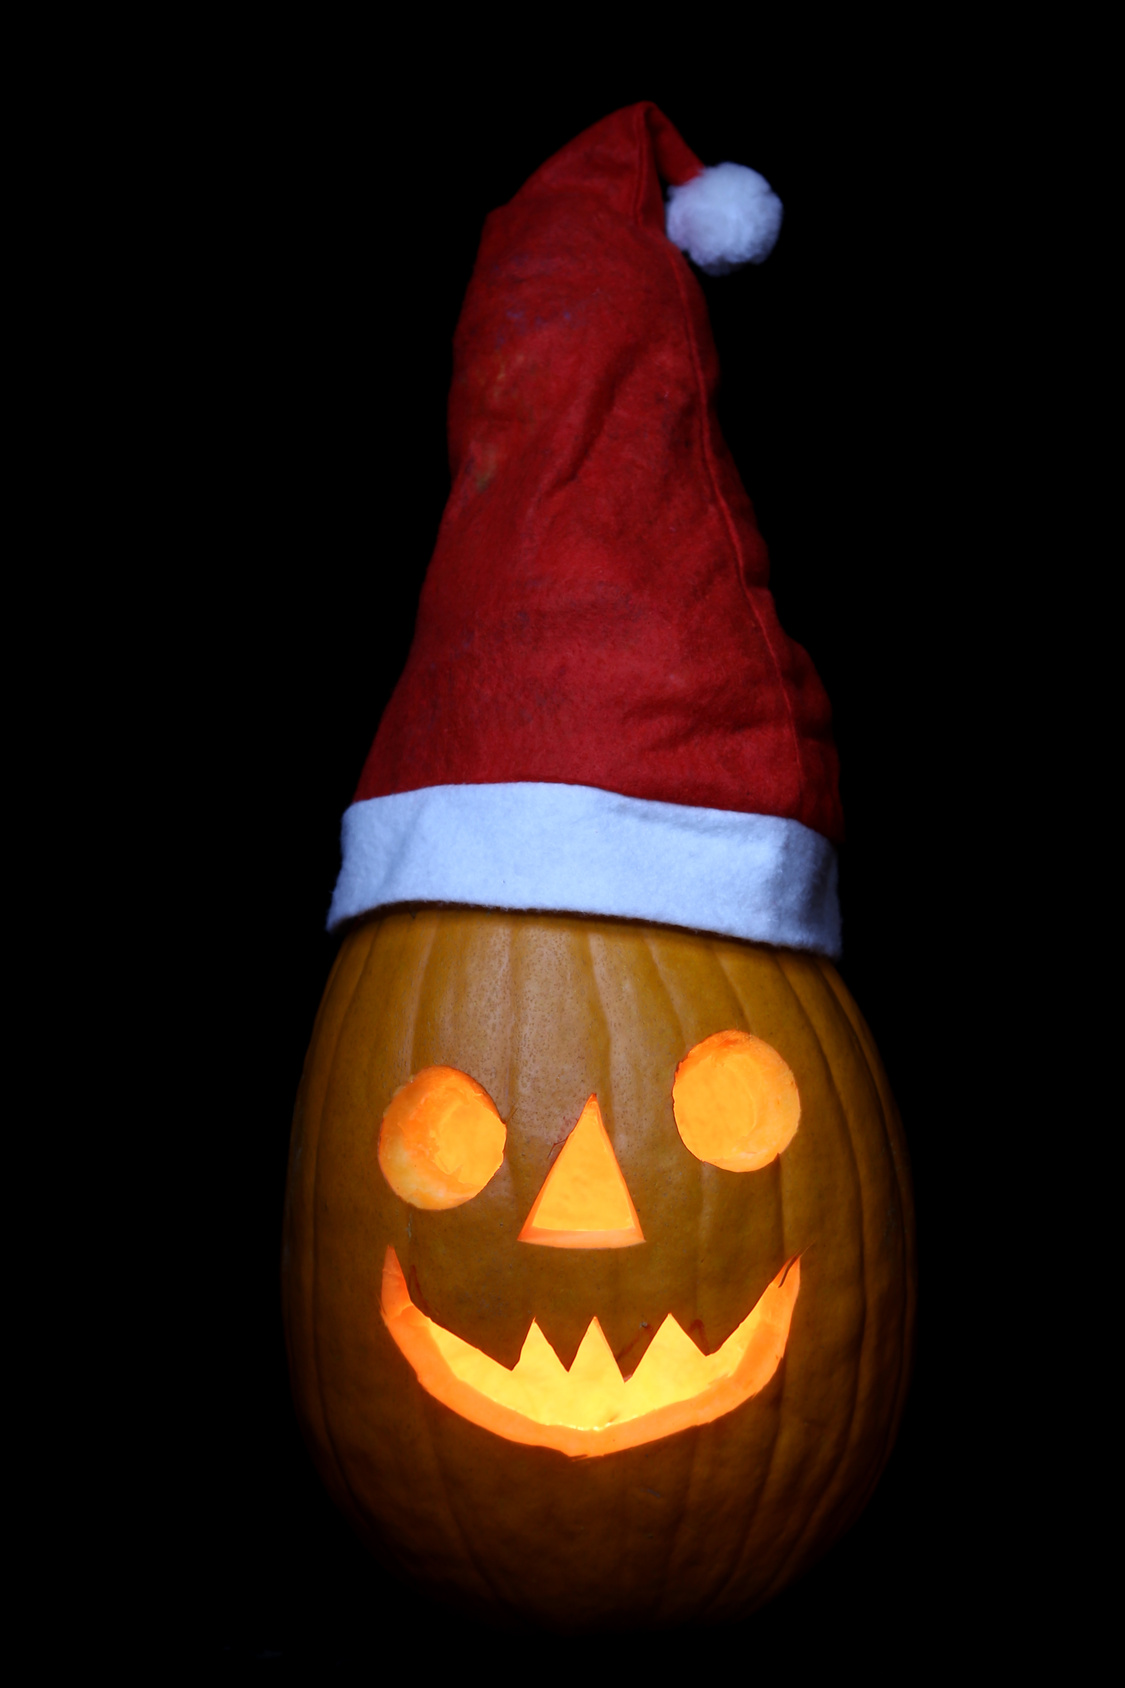 Merry Halloween - It's Beginning to Look Like the Holidays